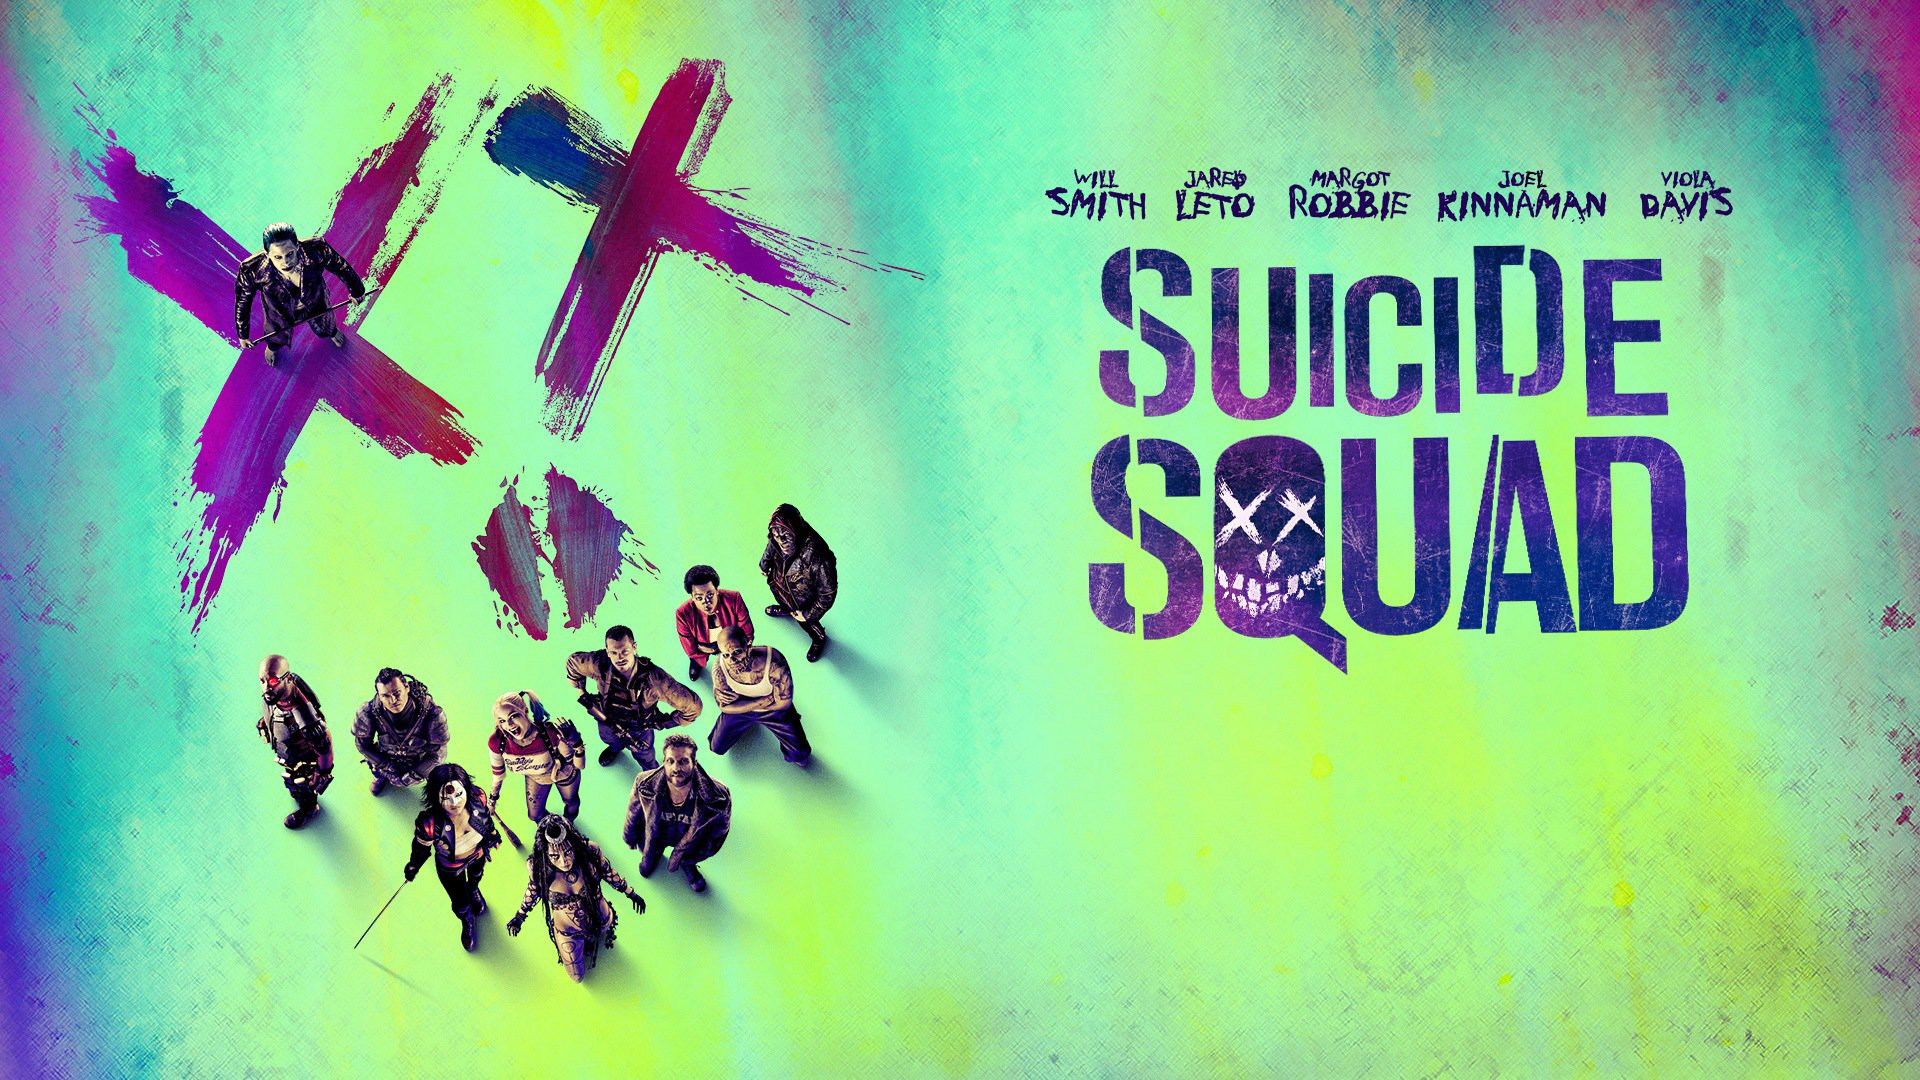 HD Wallpaper Background ID721701. Movie Suicide Squad